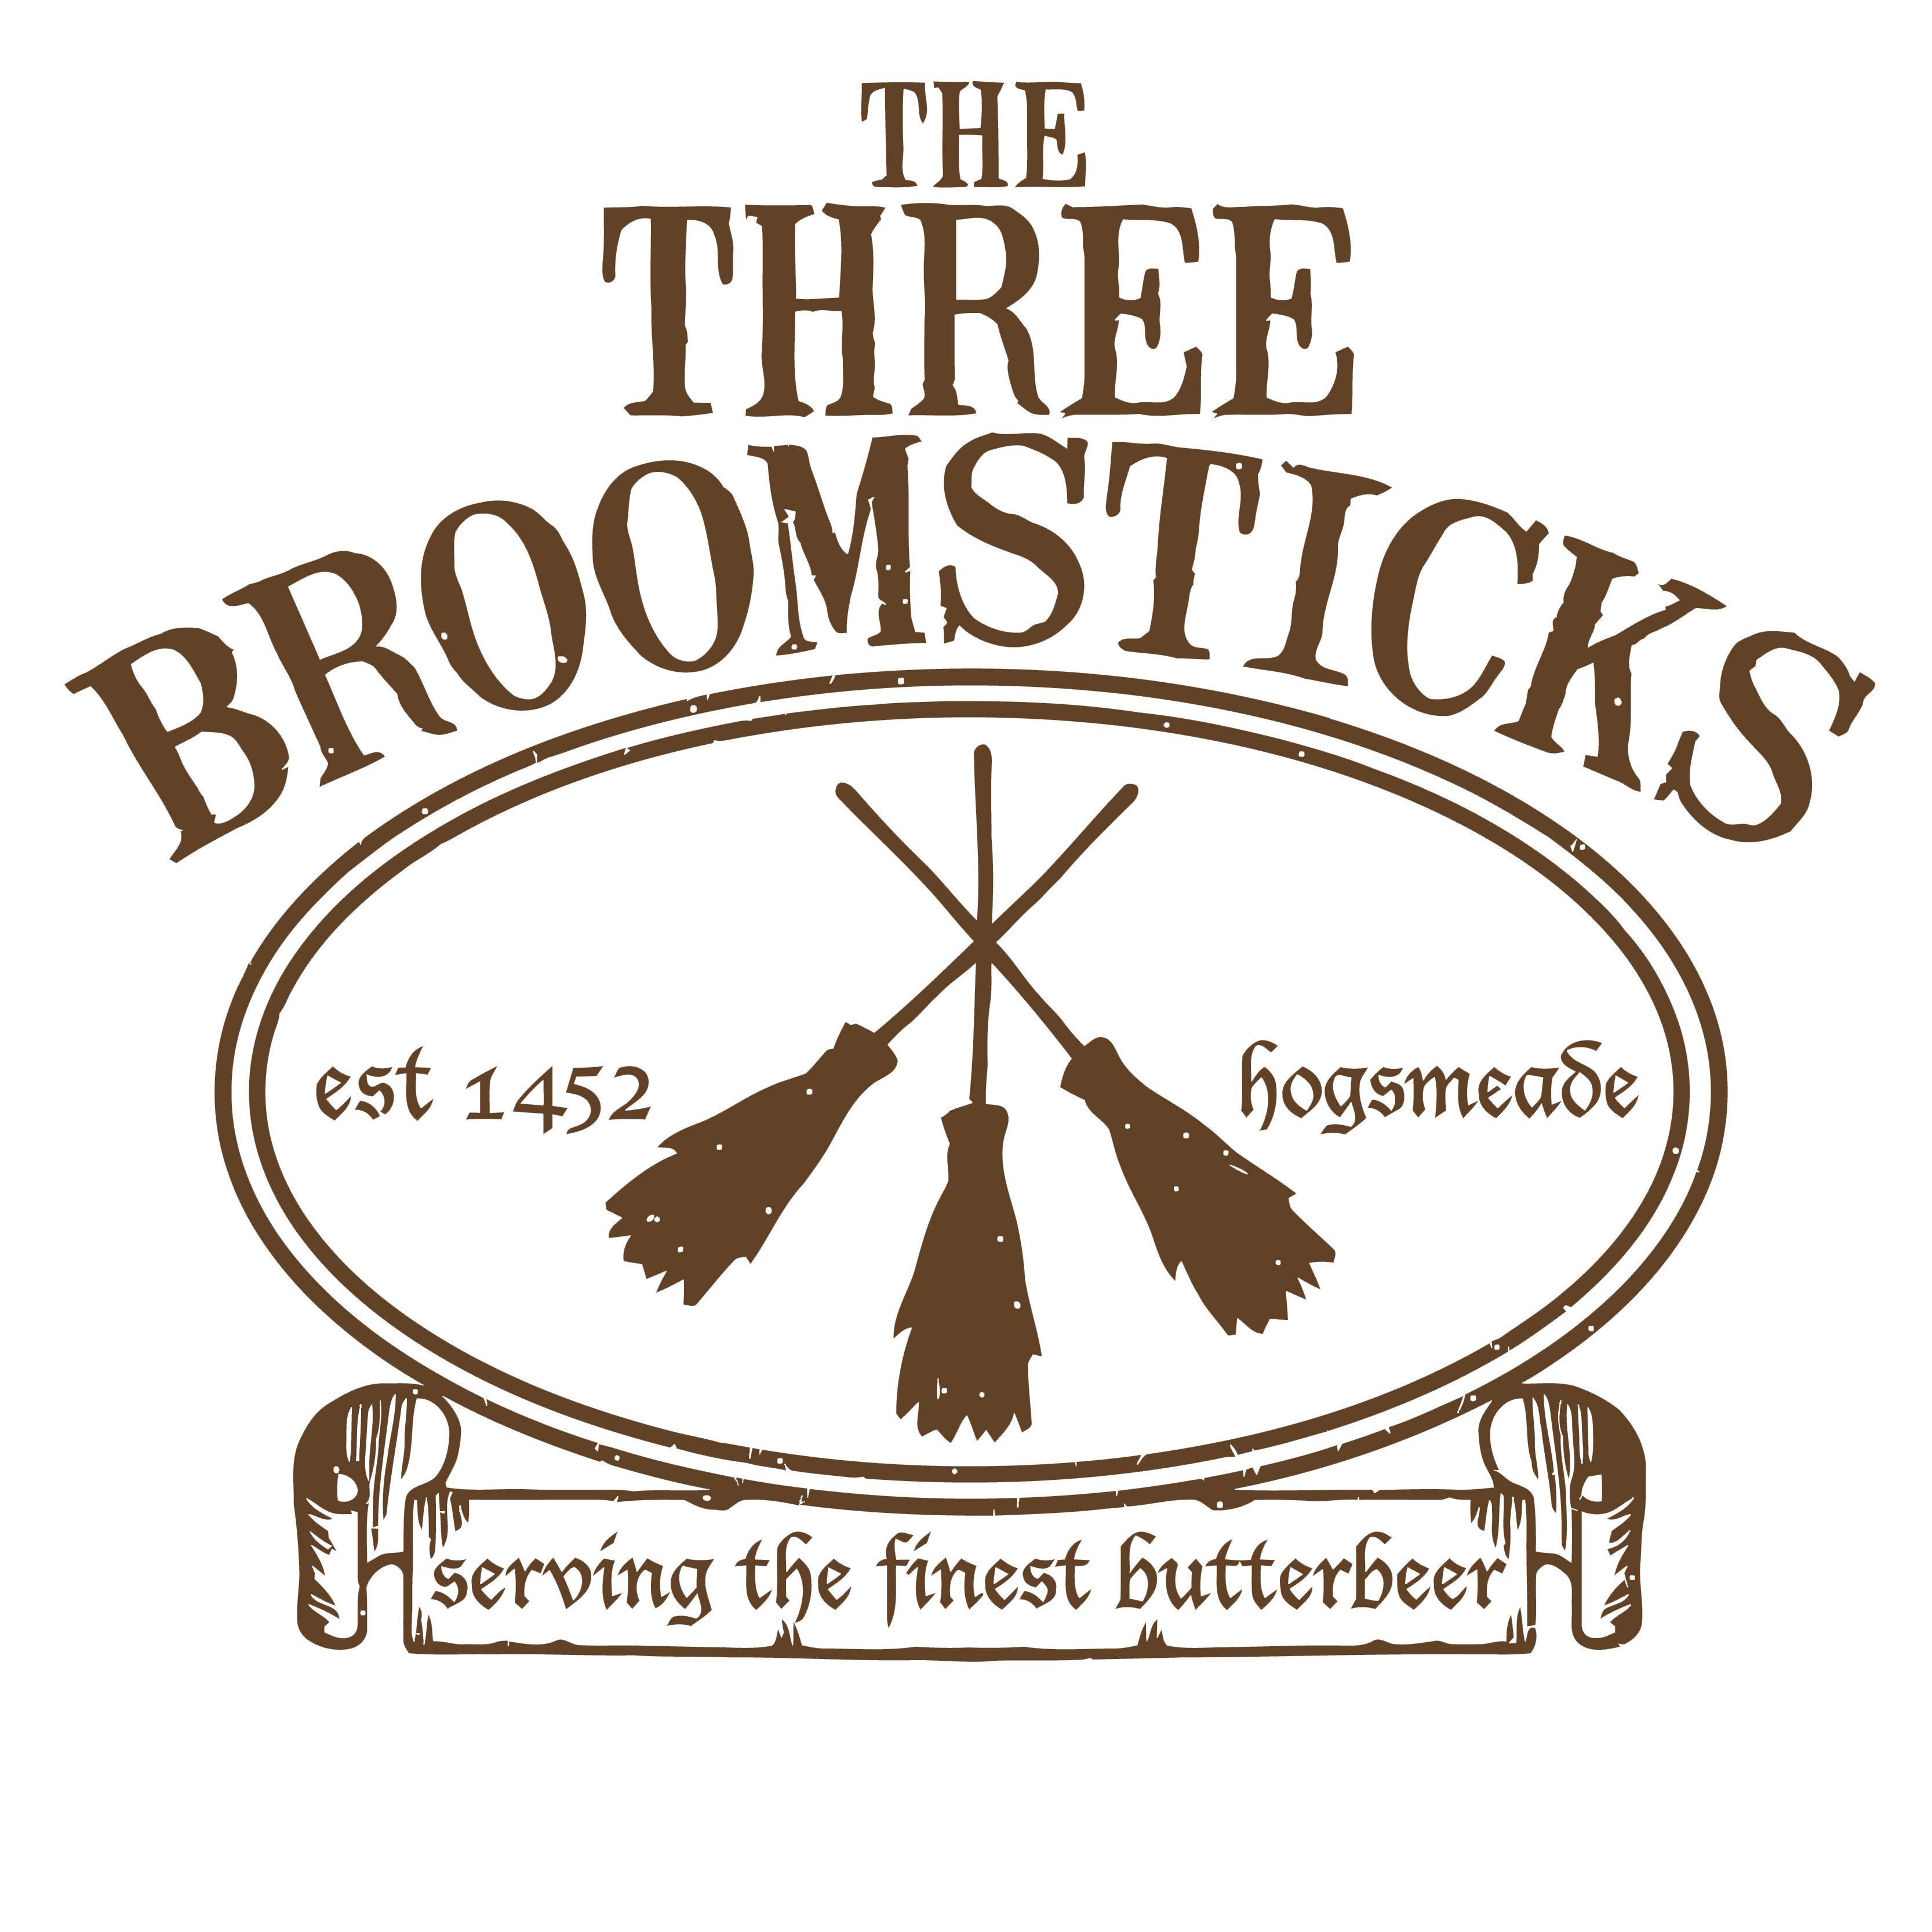 Download The Three Broomsticks Logo (from Harry Potter) Huge, High ...